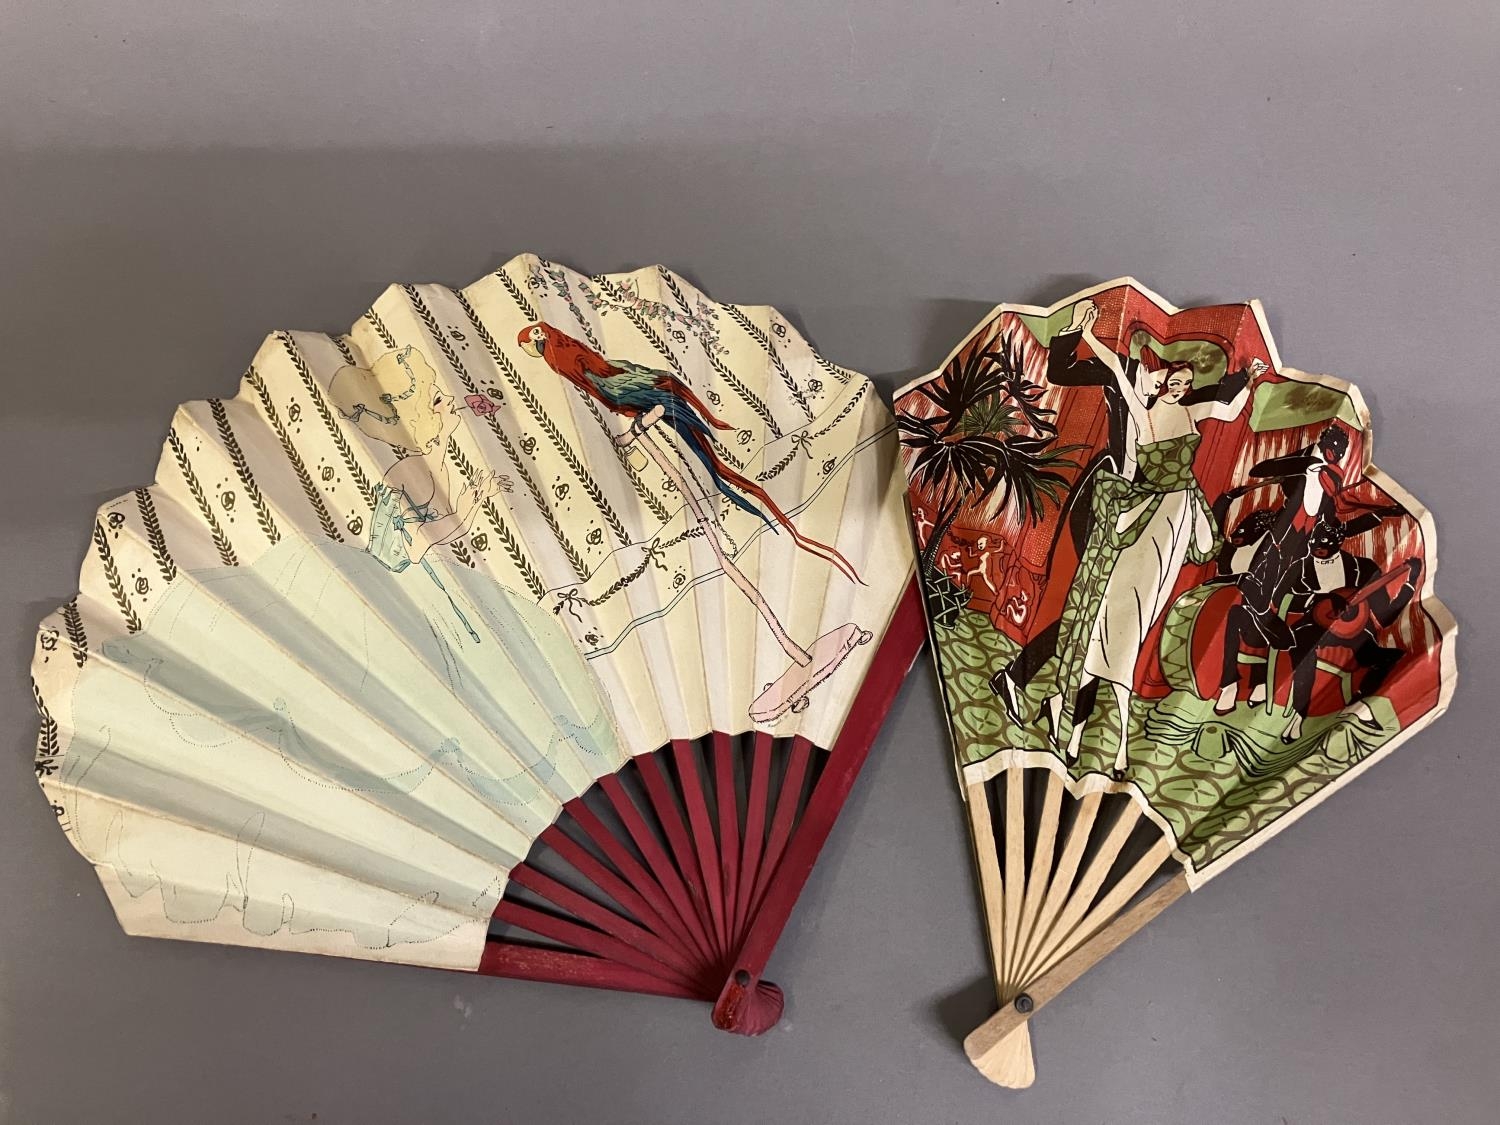 Advertising fans: The Savoy Hotel, printed by Maquet, a good paper fan with double leaf, sticks dyed - Bild 2 aus 5